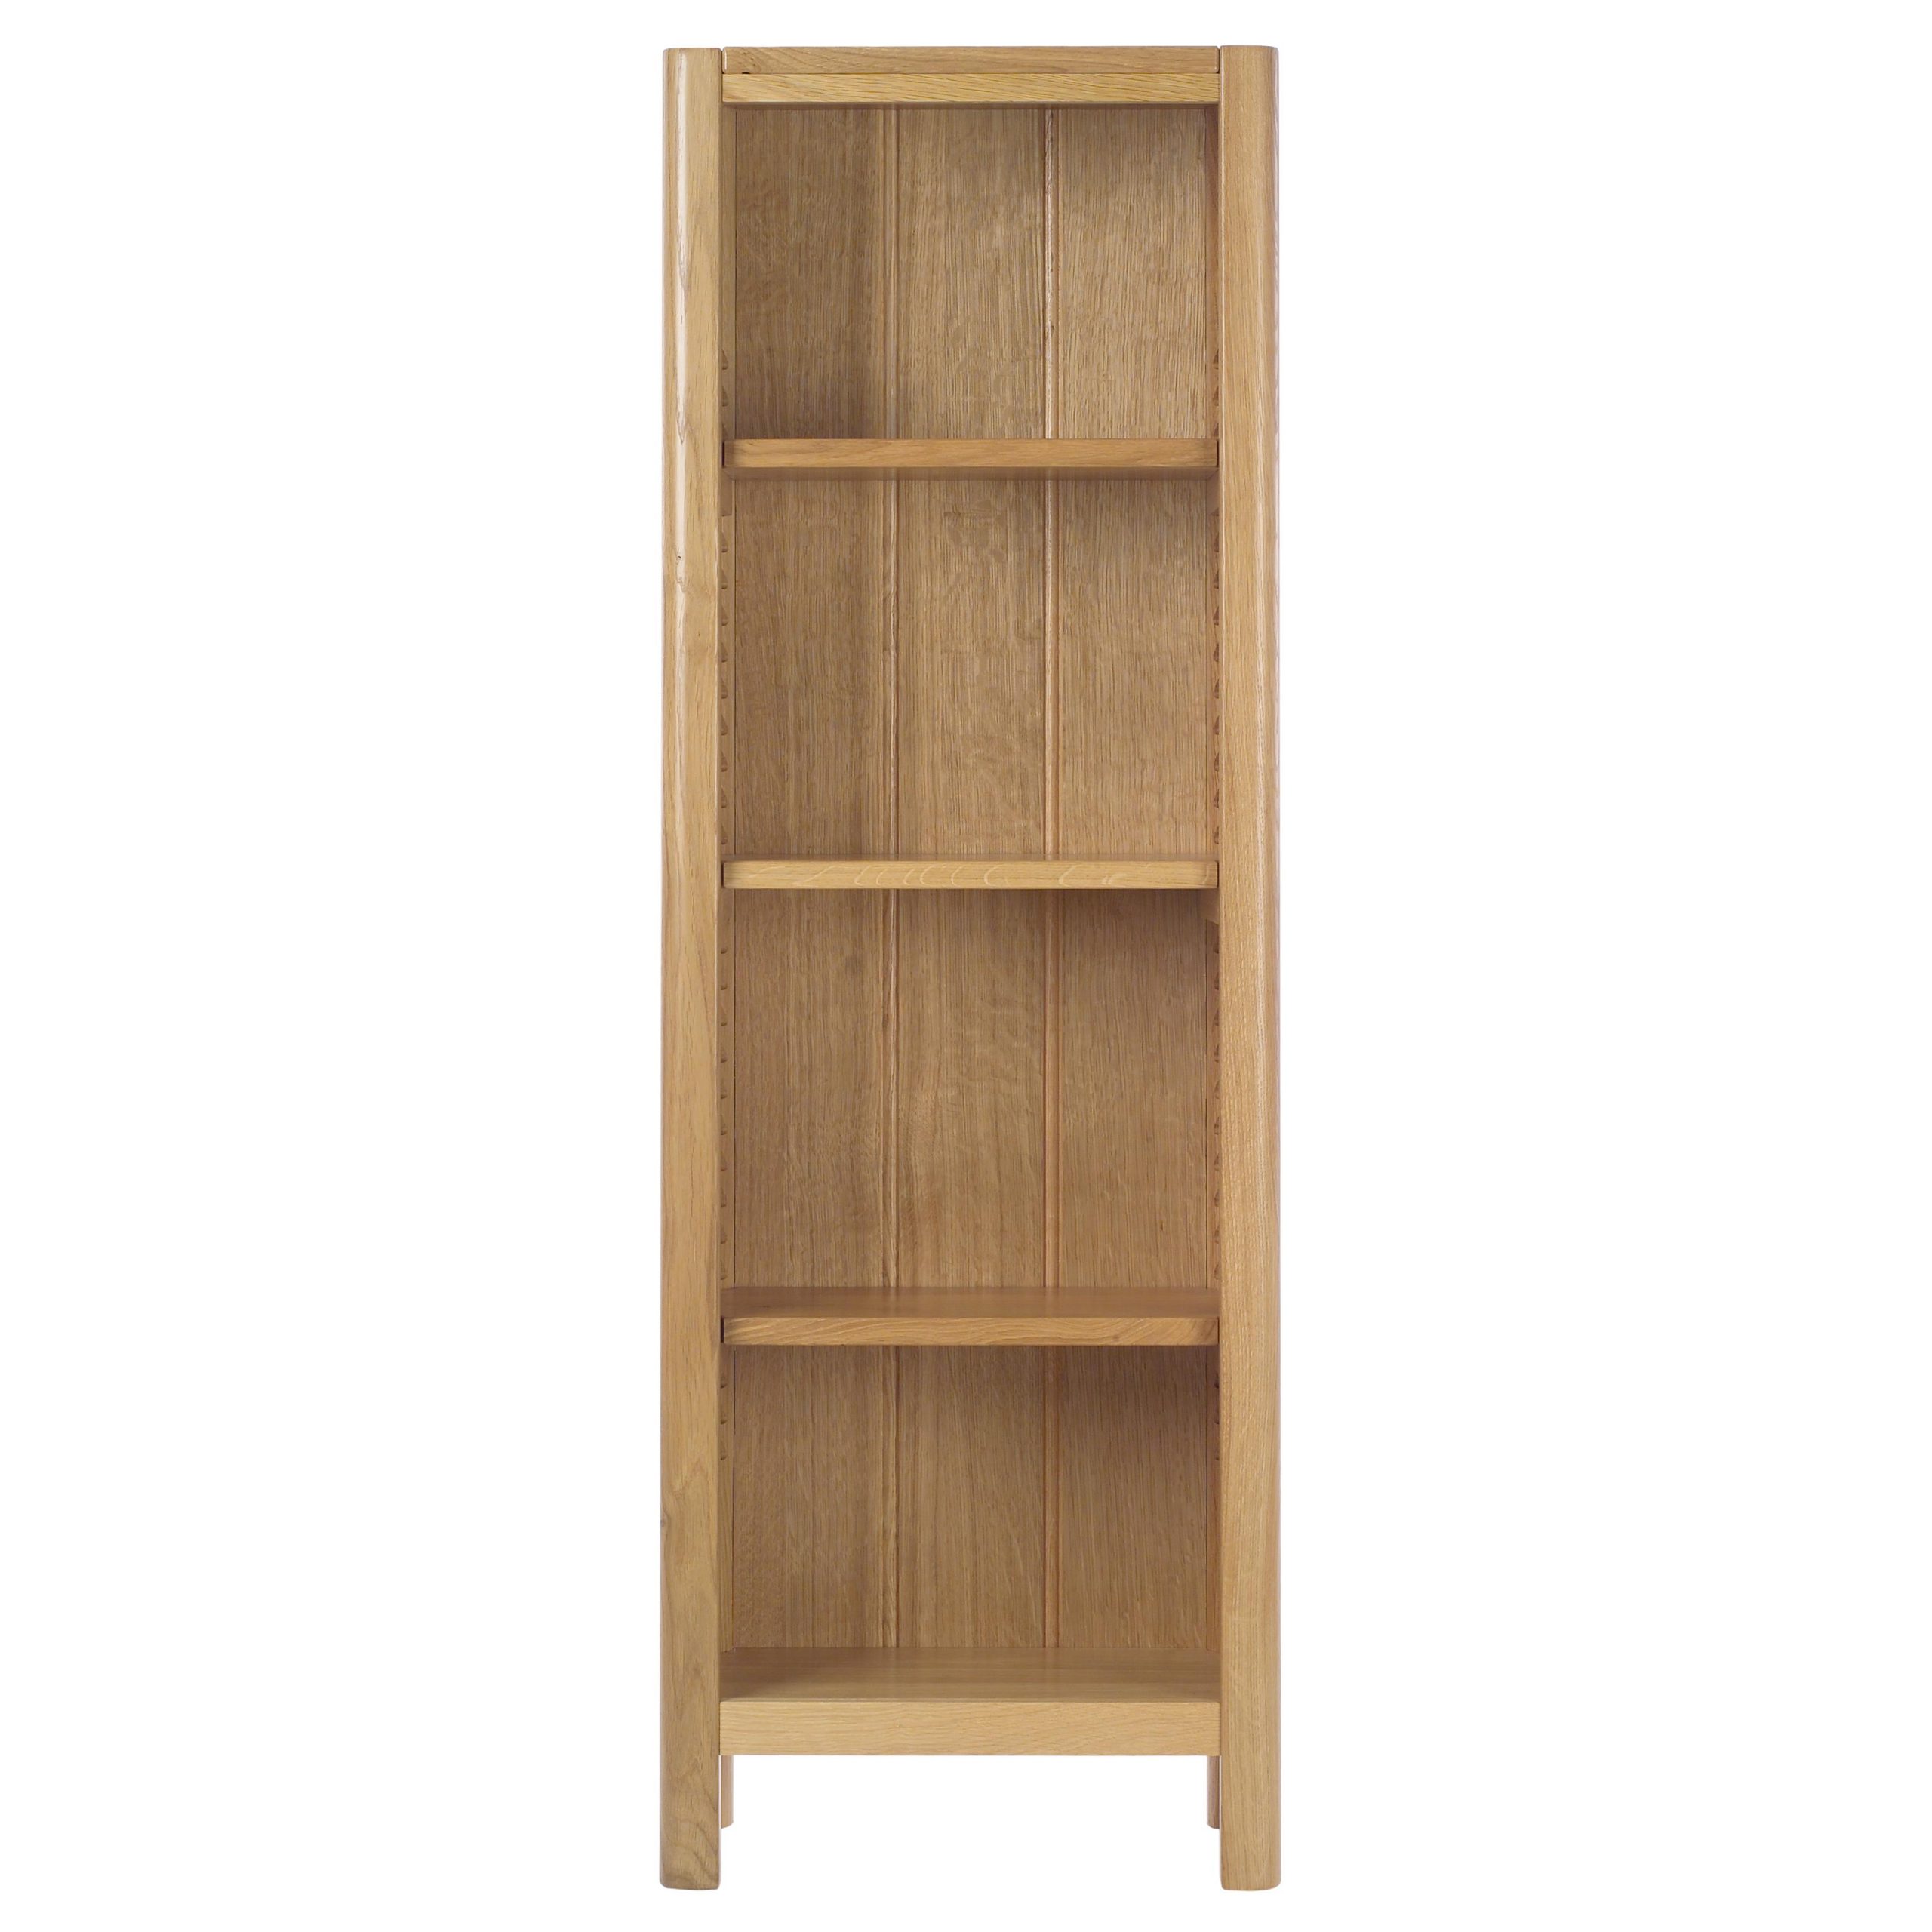 Shallow Depth Bookcase Shallow Bookcase Cabinet Painted pertaining to measurements 3445 X 3445